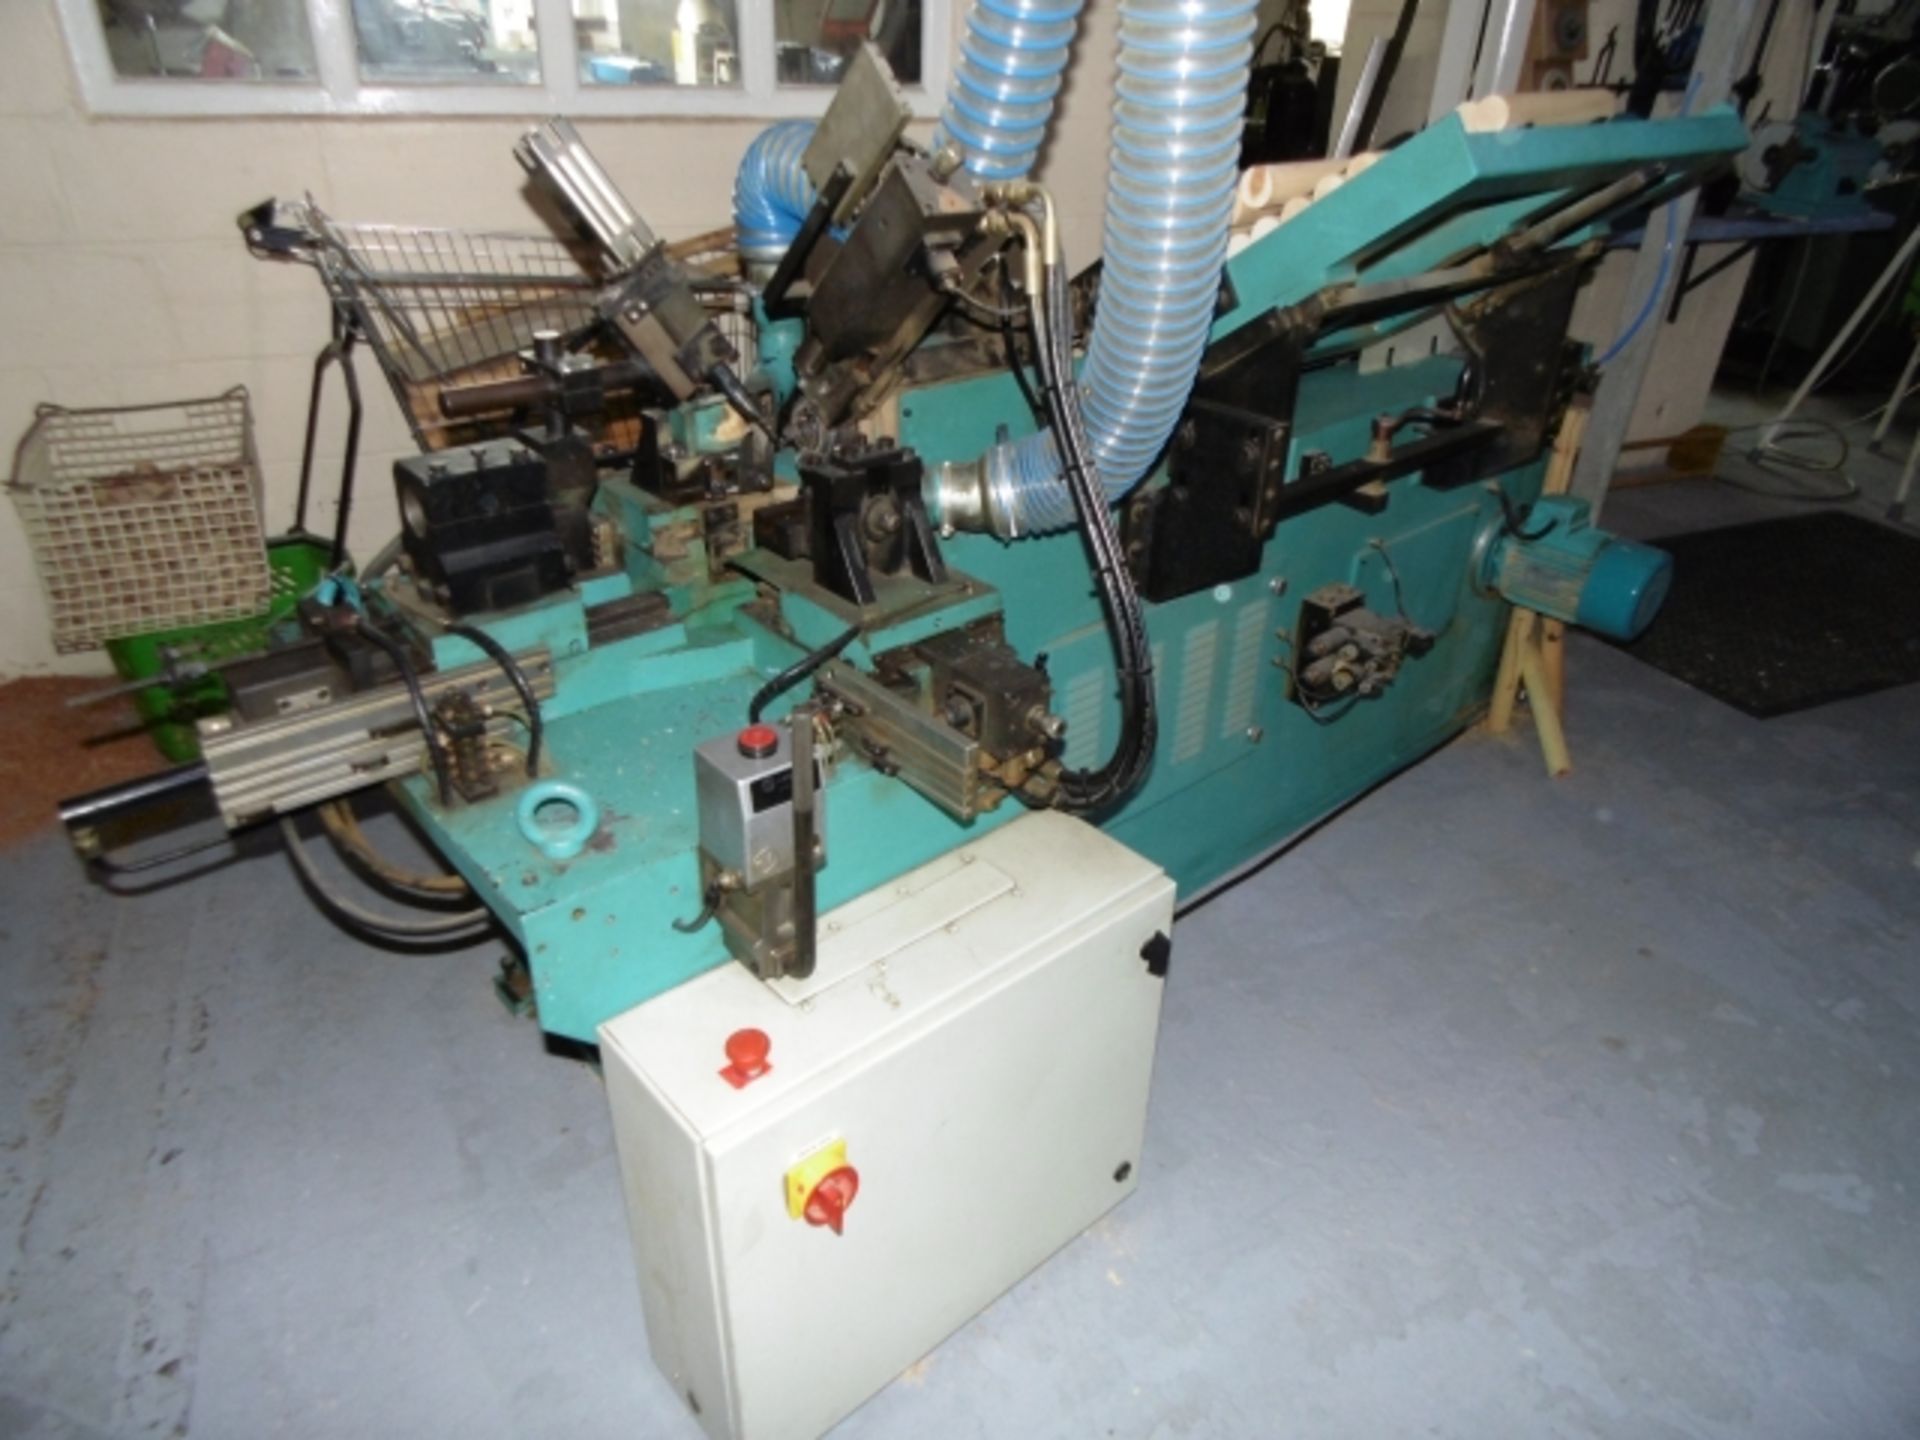 * 1997 Intorex TRV-45 Automatic Wood Turning Lathe. Serial No 201278. 2 knives, frontal tool and a - Image 7 of 11